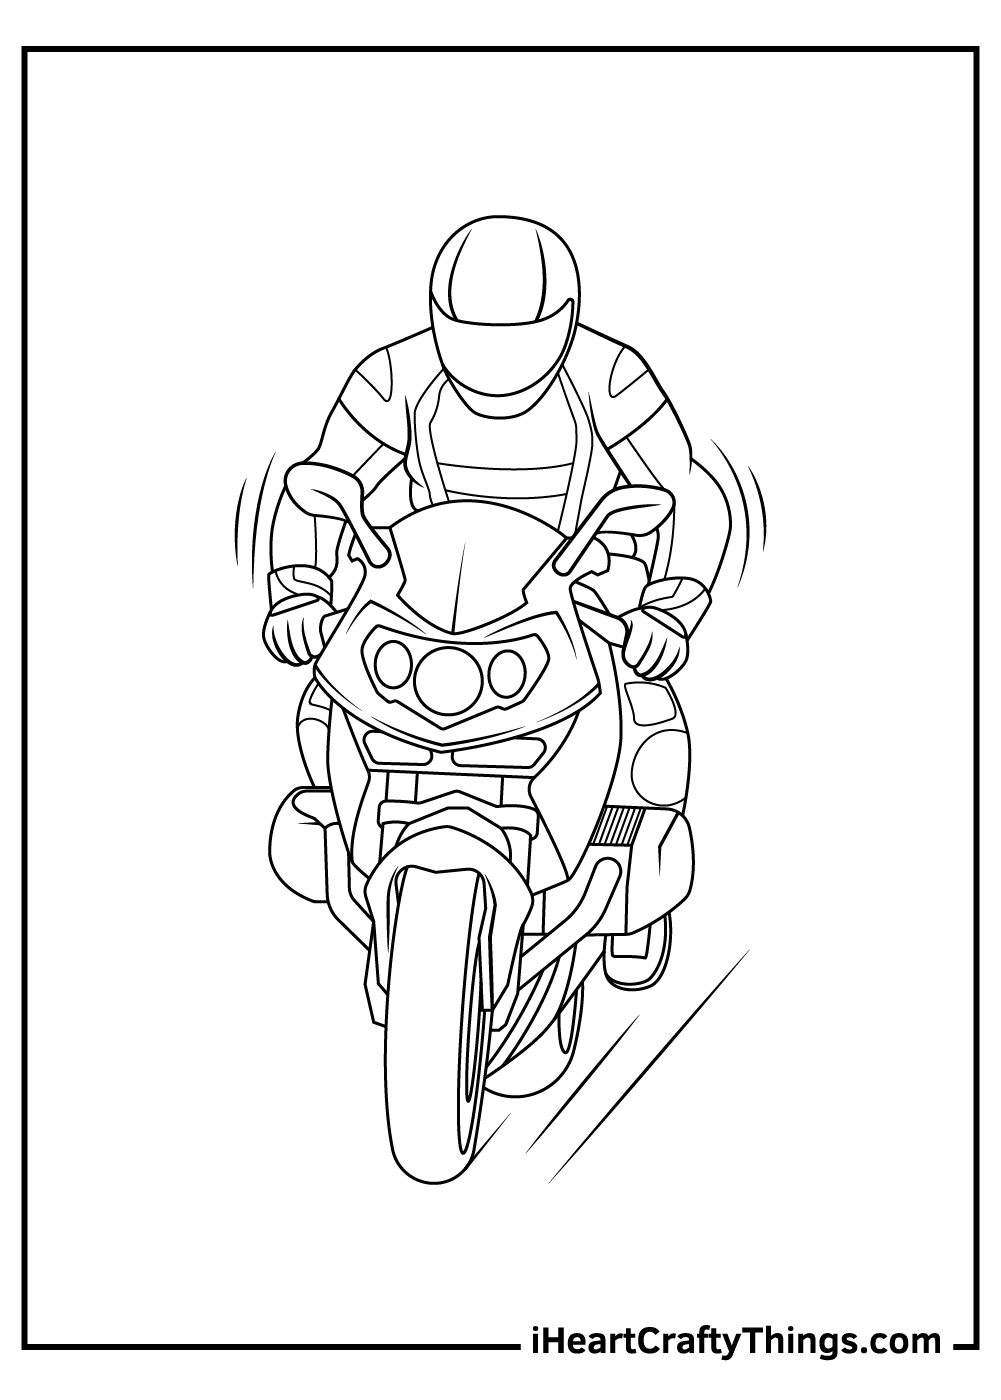 Motorcycle coloring pages free printables